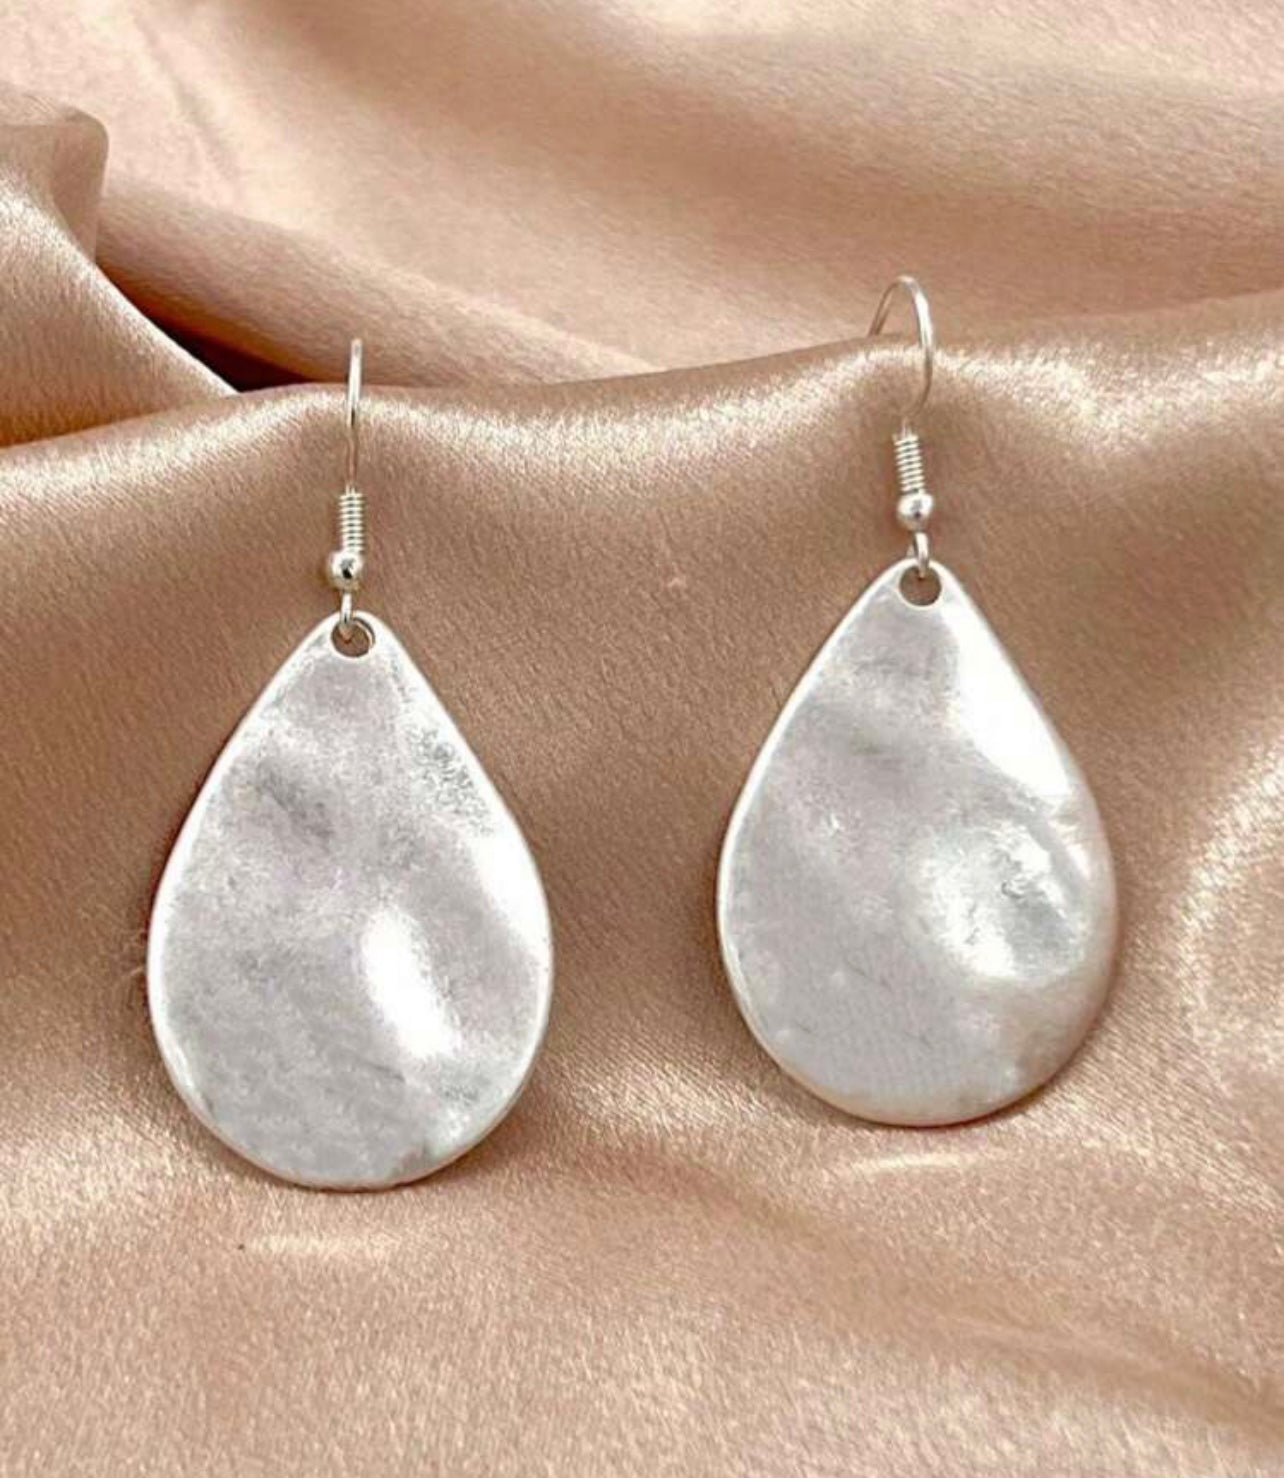 Beautiful Hammered Gold or Silver Drop Earrings